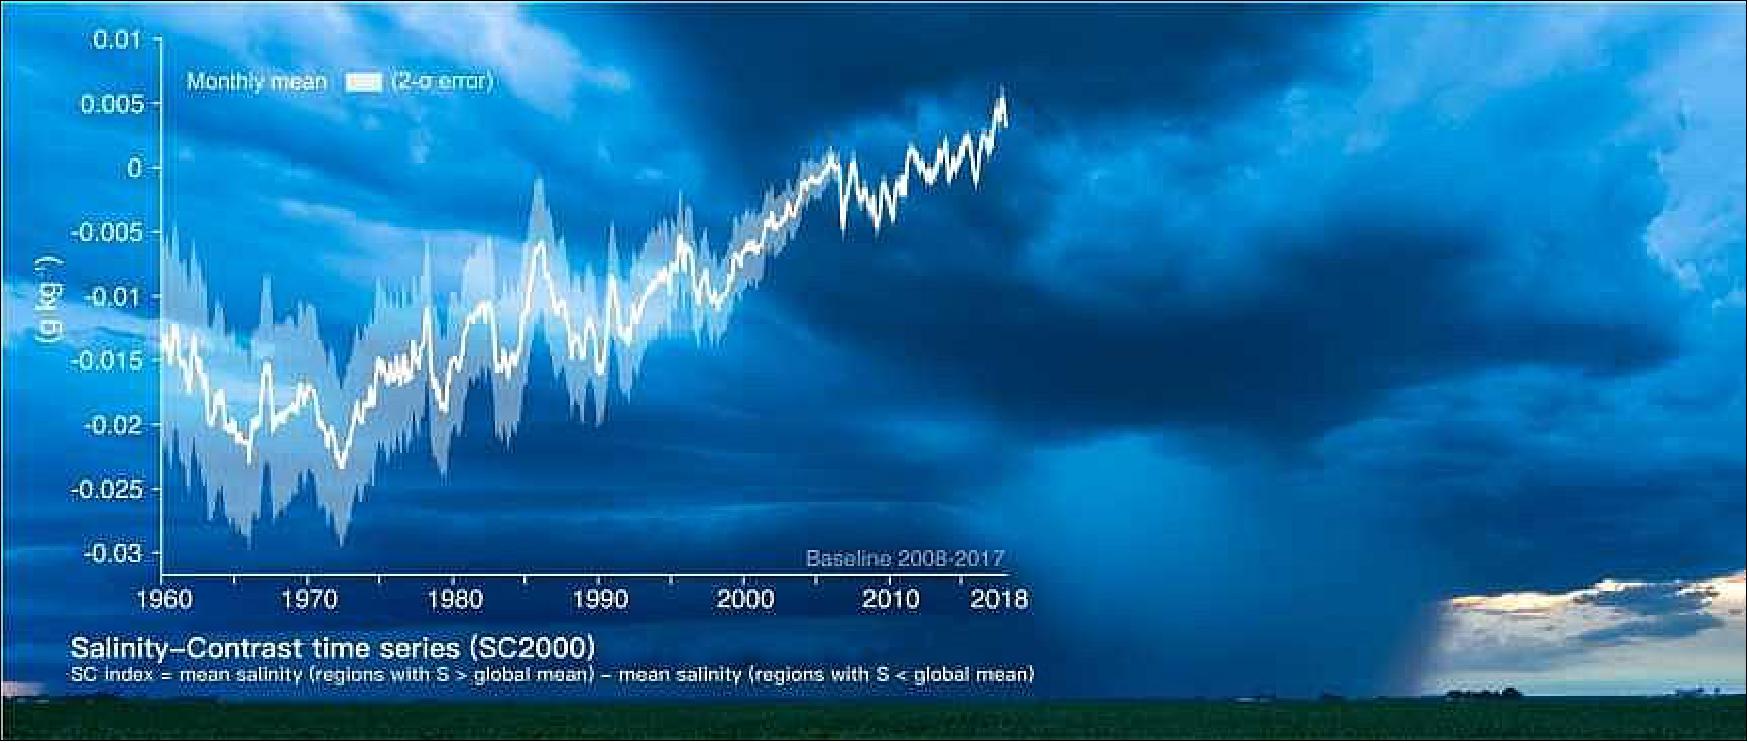 Figure 71: Increasing salinity-contrast in the world's ocean. The figure shows the salinity-contrast time series from 1960 to 2017 at the upper ocean 2000 m. Background photograph: Xilin Wang (image credit: Ocean salinity study team)